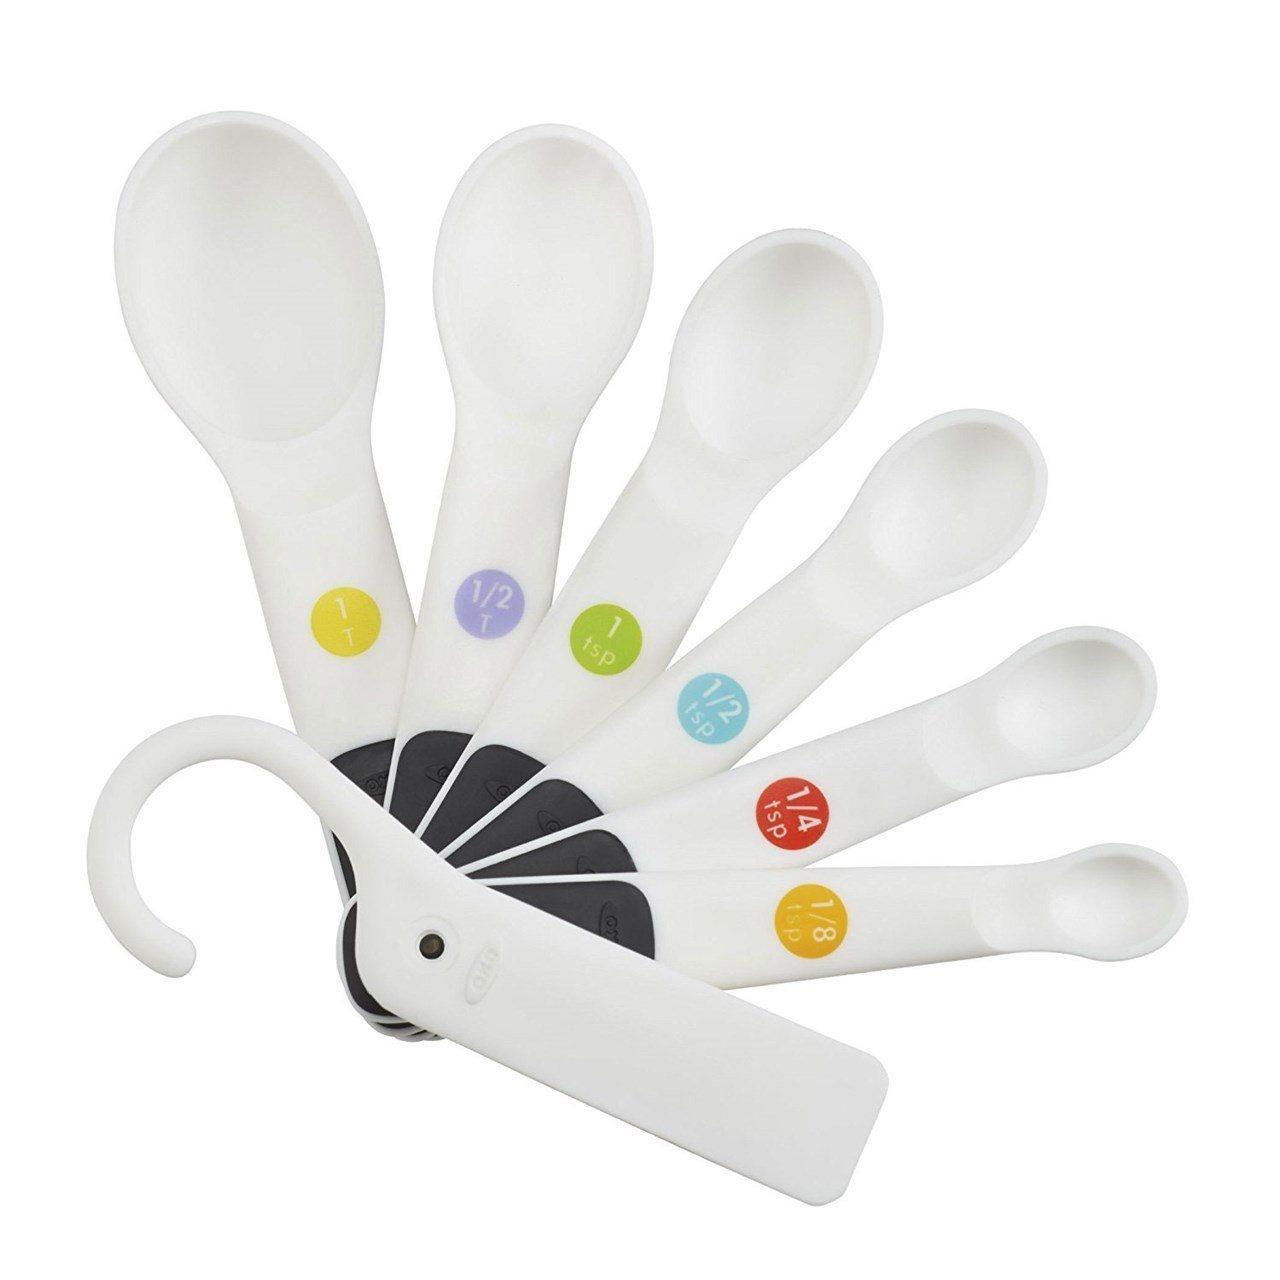 Good Grips Utensils -White - Measuring Spoon Set - The Low Vision Store